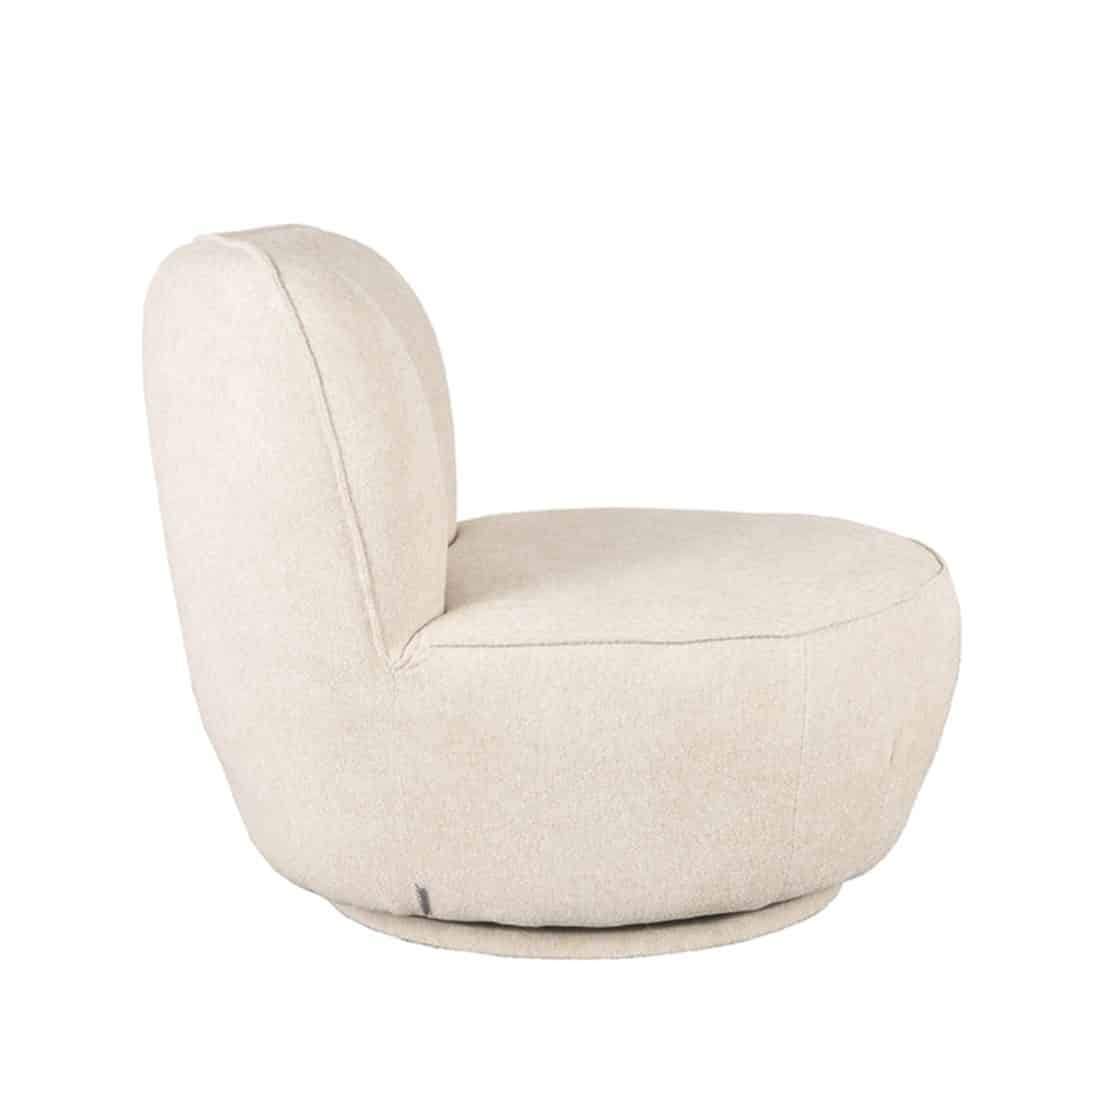 Fauteuil Bunny 8211 Beige 8211 Boucle 8211 Rhb Home Amp Living